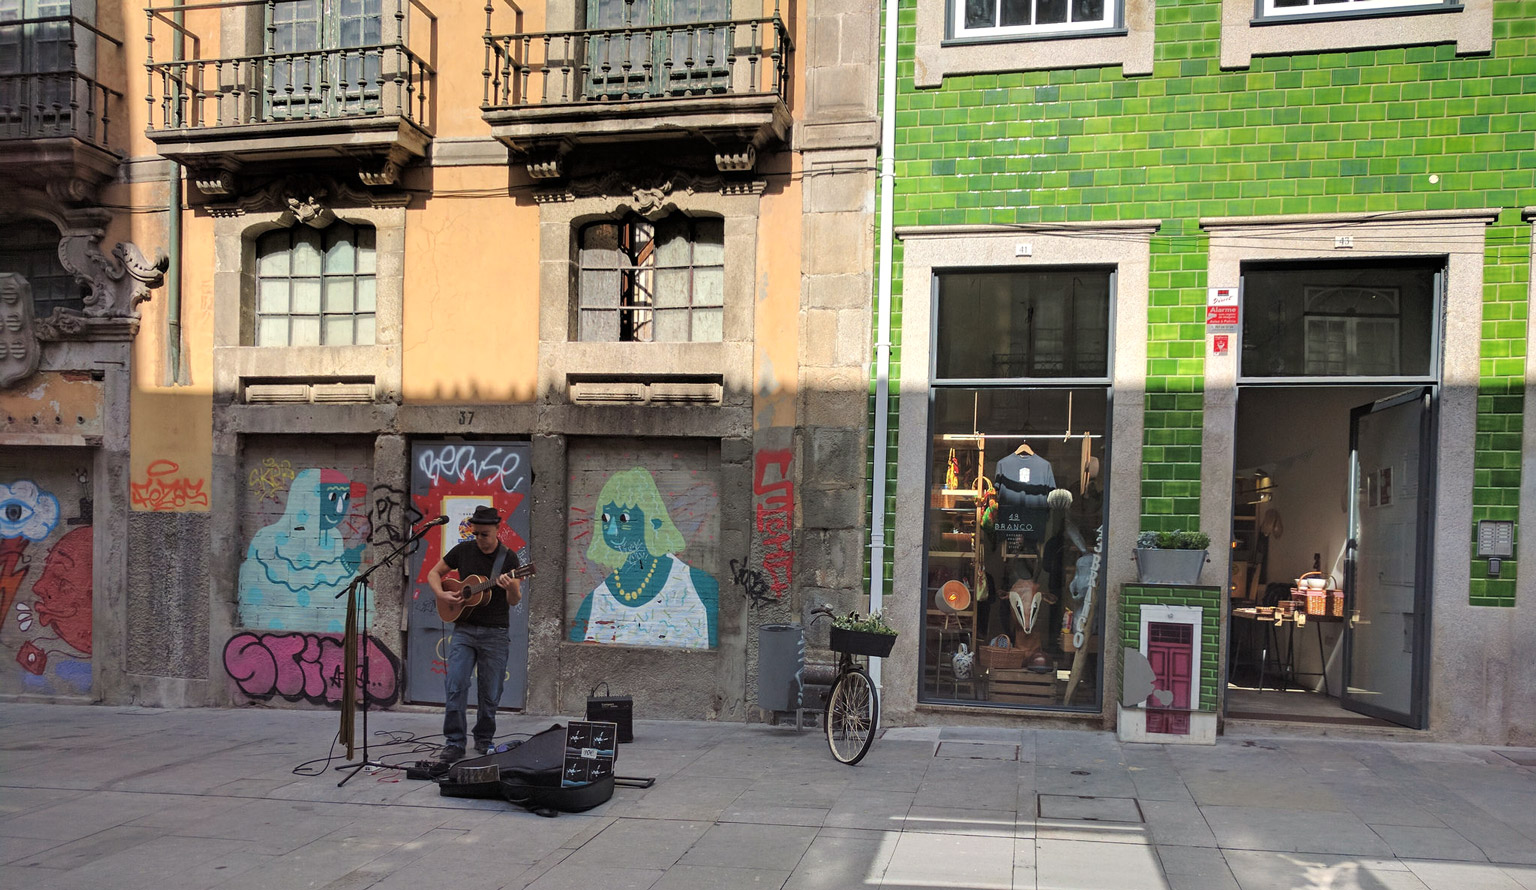 A typical scene on Rua das Flores. A busker plays in front of an abandoned building, while next door is a quirky clothing and accessories shop and AirBnB apartments (including ours)